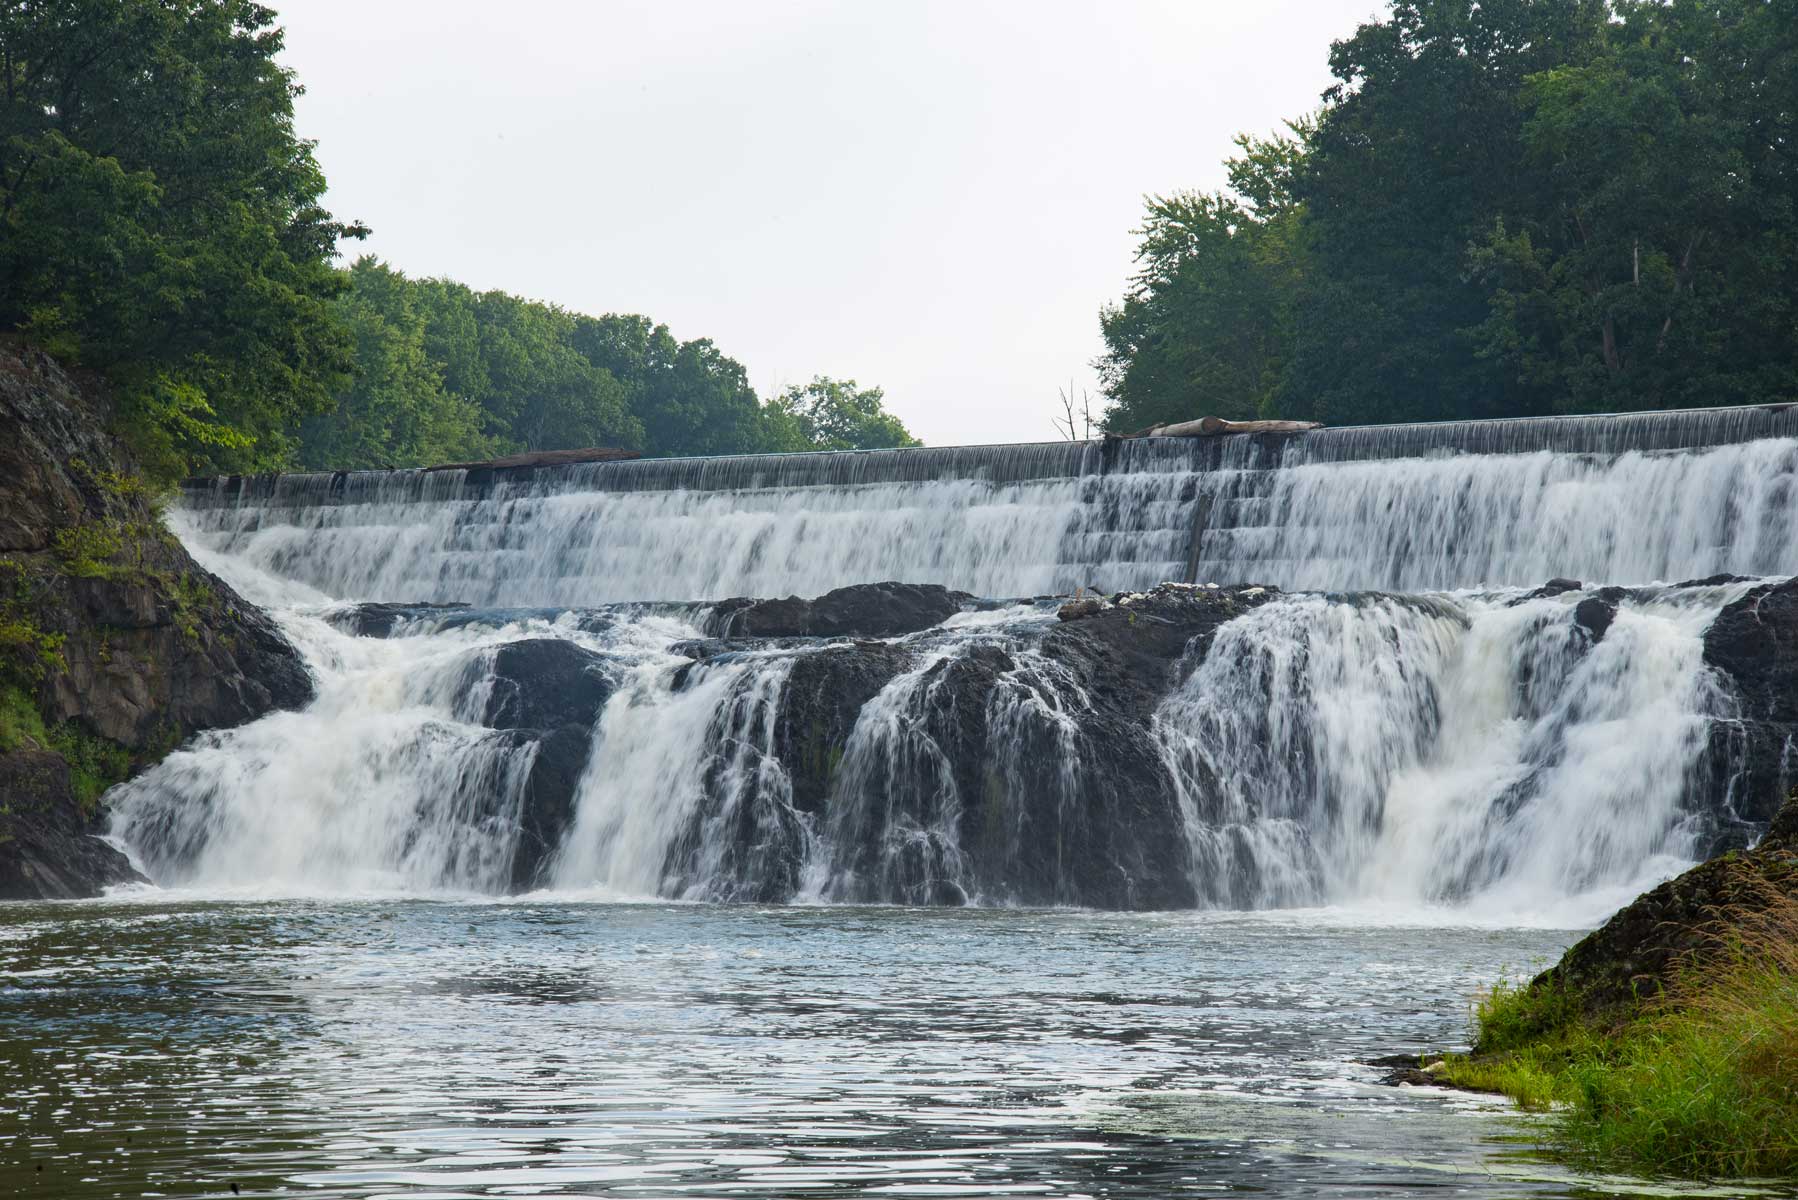 Sugar Island Dam and Falls – Potsdam, Town of, St. Lawrence